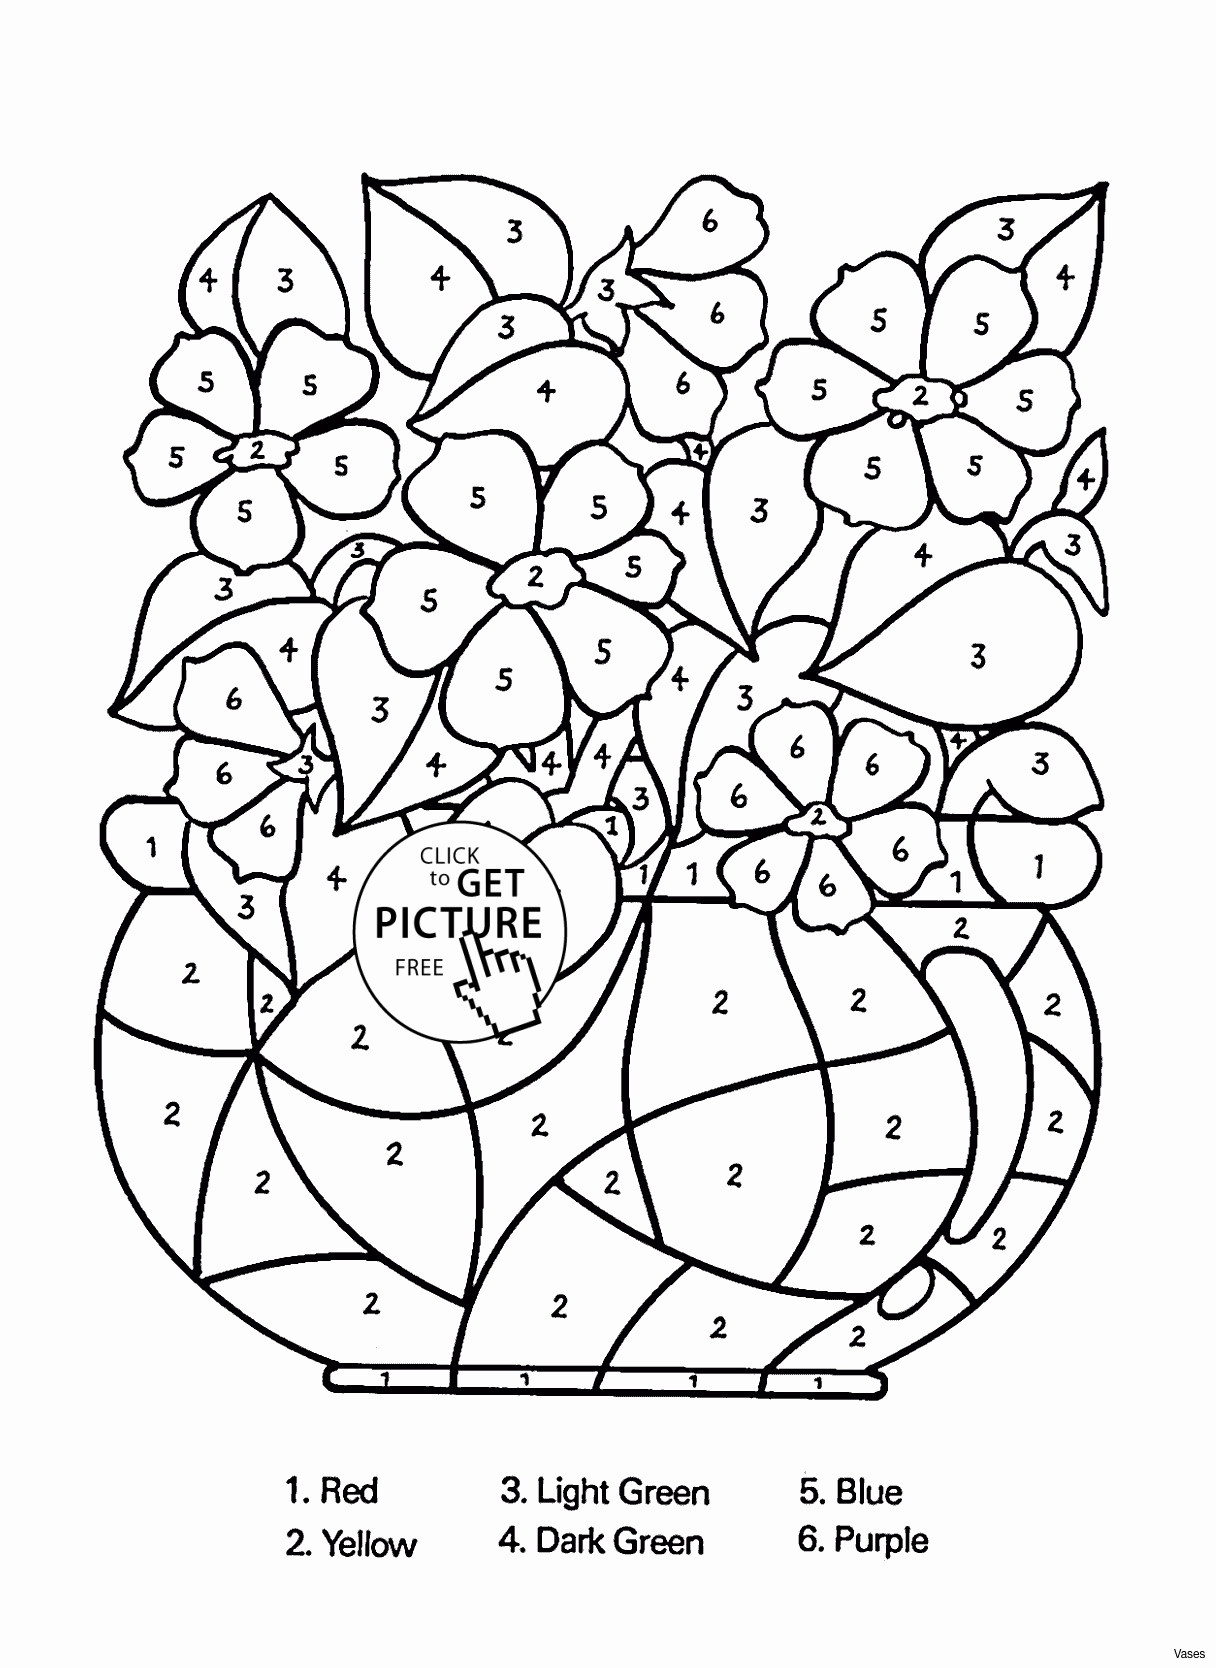 Food Pyramid Coloring Pages Coloring Ideas Library Coloring Pages Fun Time Ideas Food Pyramid